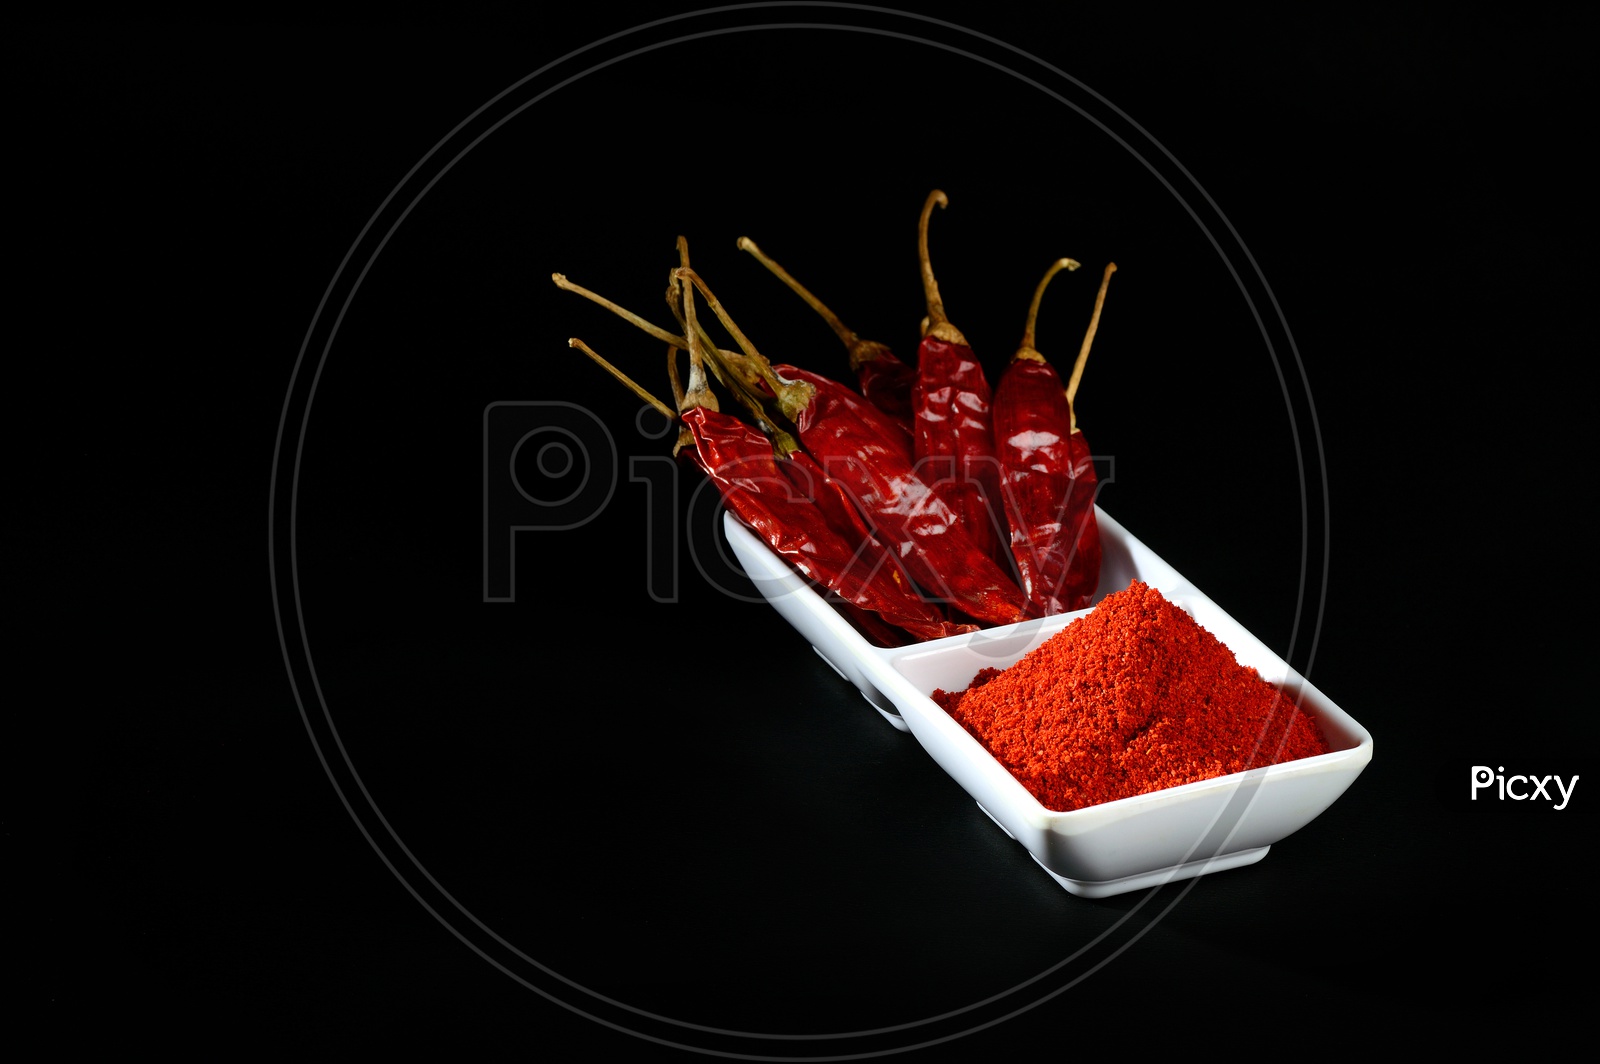 chilly powder with red chilly in white plate, dried chillies on black background